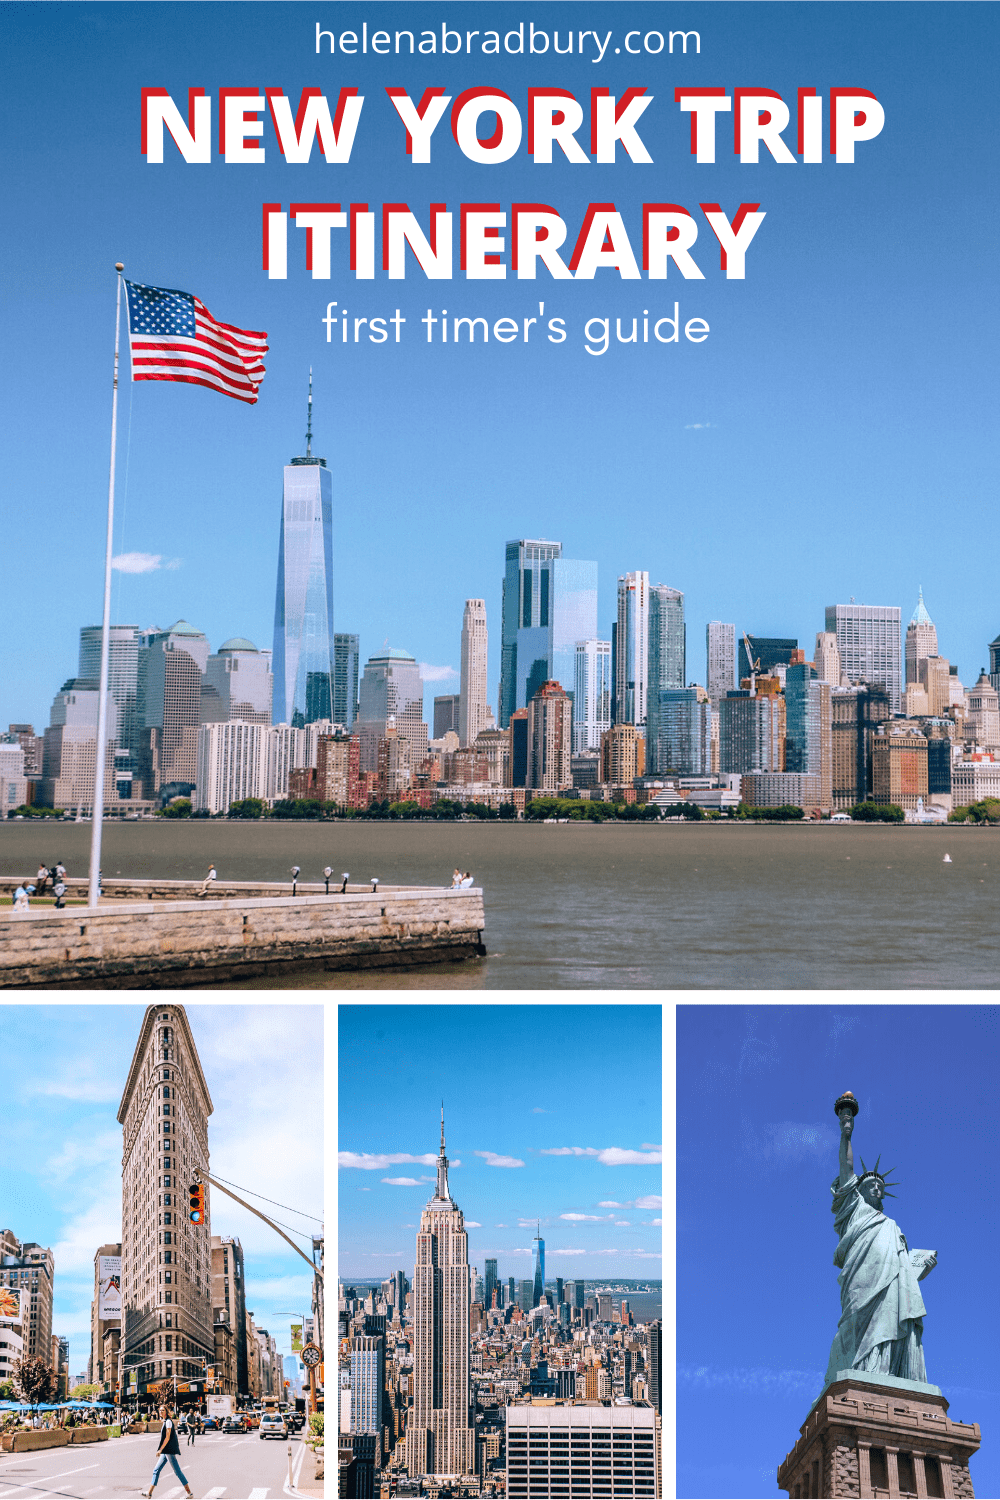 A First Timer's Guide and New York trip itinerary. Planning your first New York trip itinerary can be overwhelming. This is a complete guide with information on how to get to and from the airport, using the subway, food recommendations, things to se…